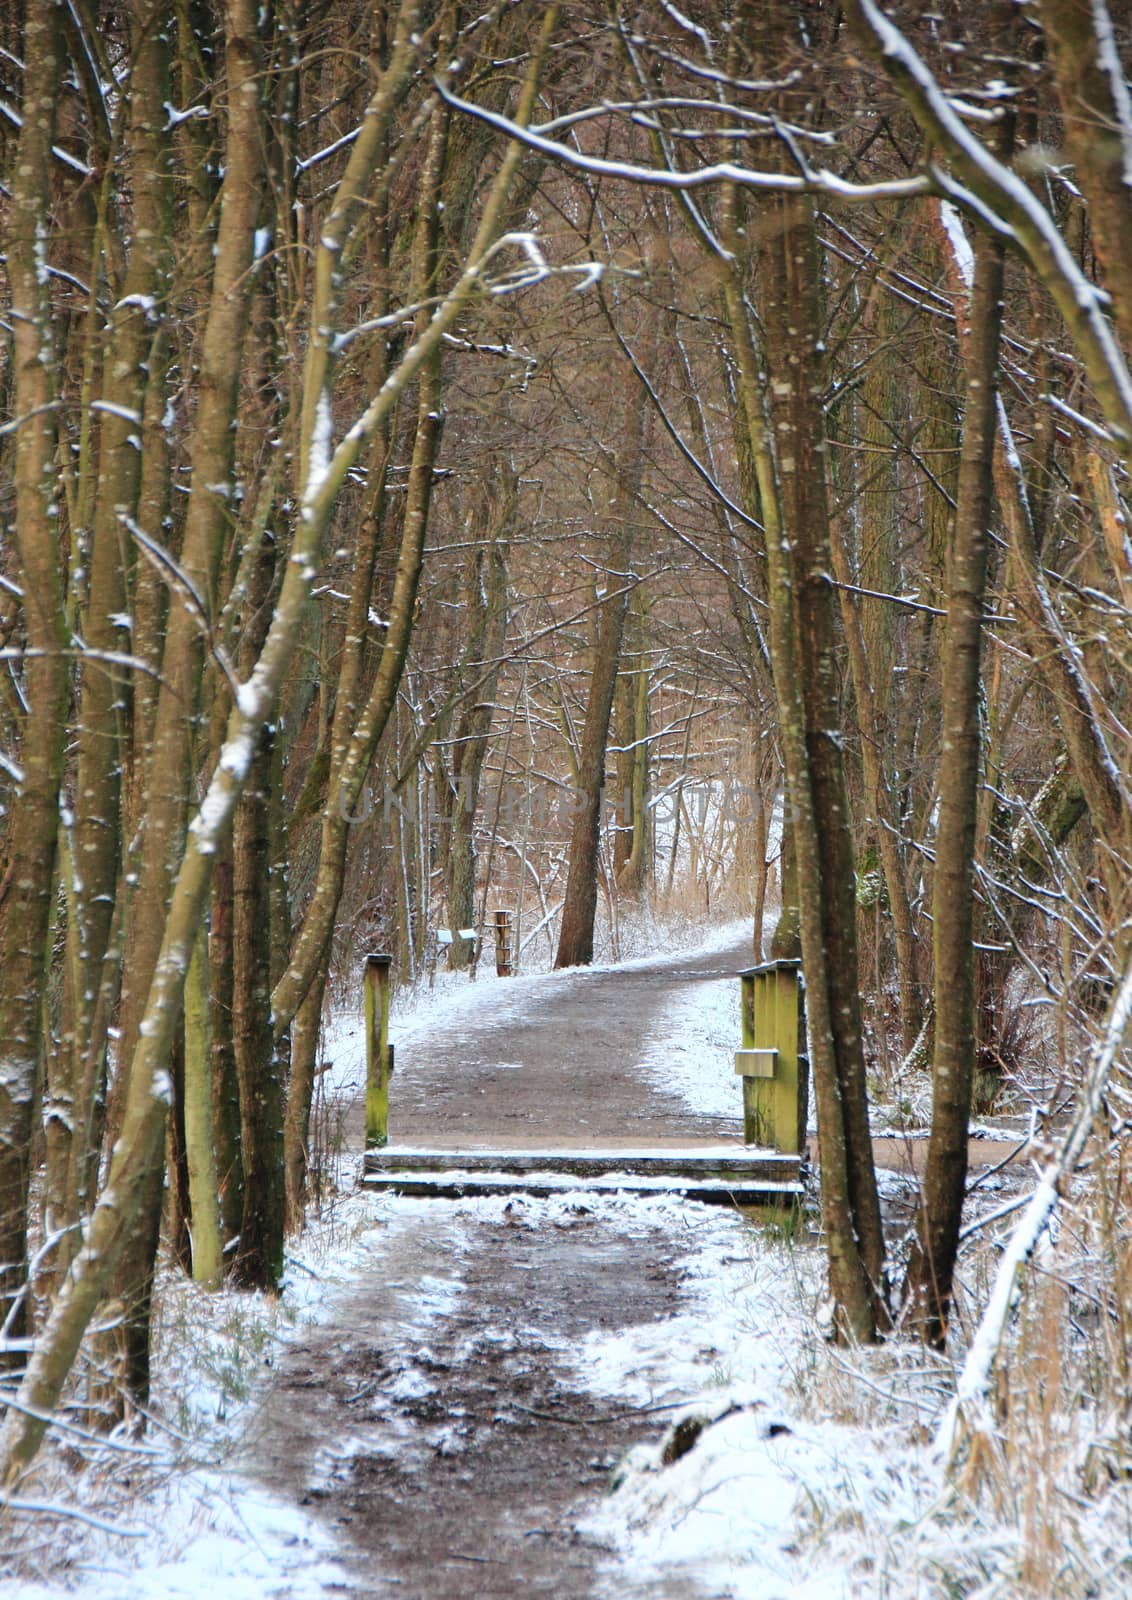 Snowy muddy forest path in cold winter